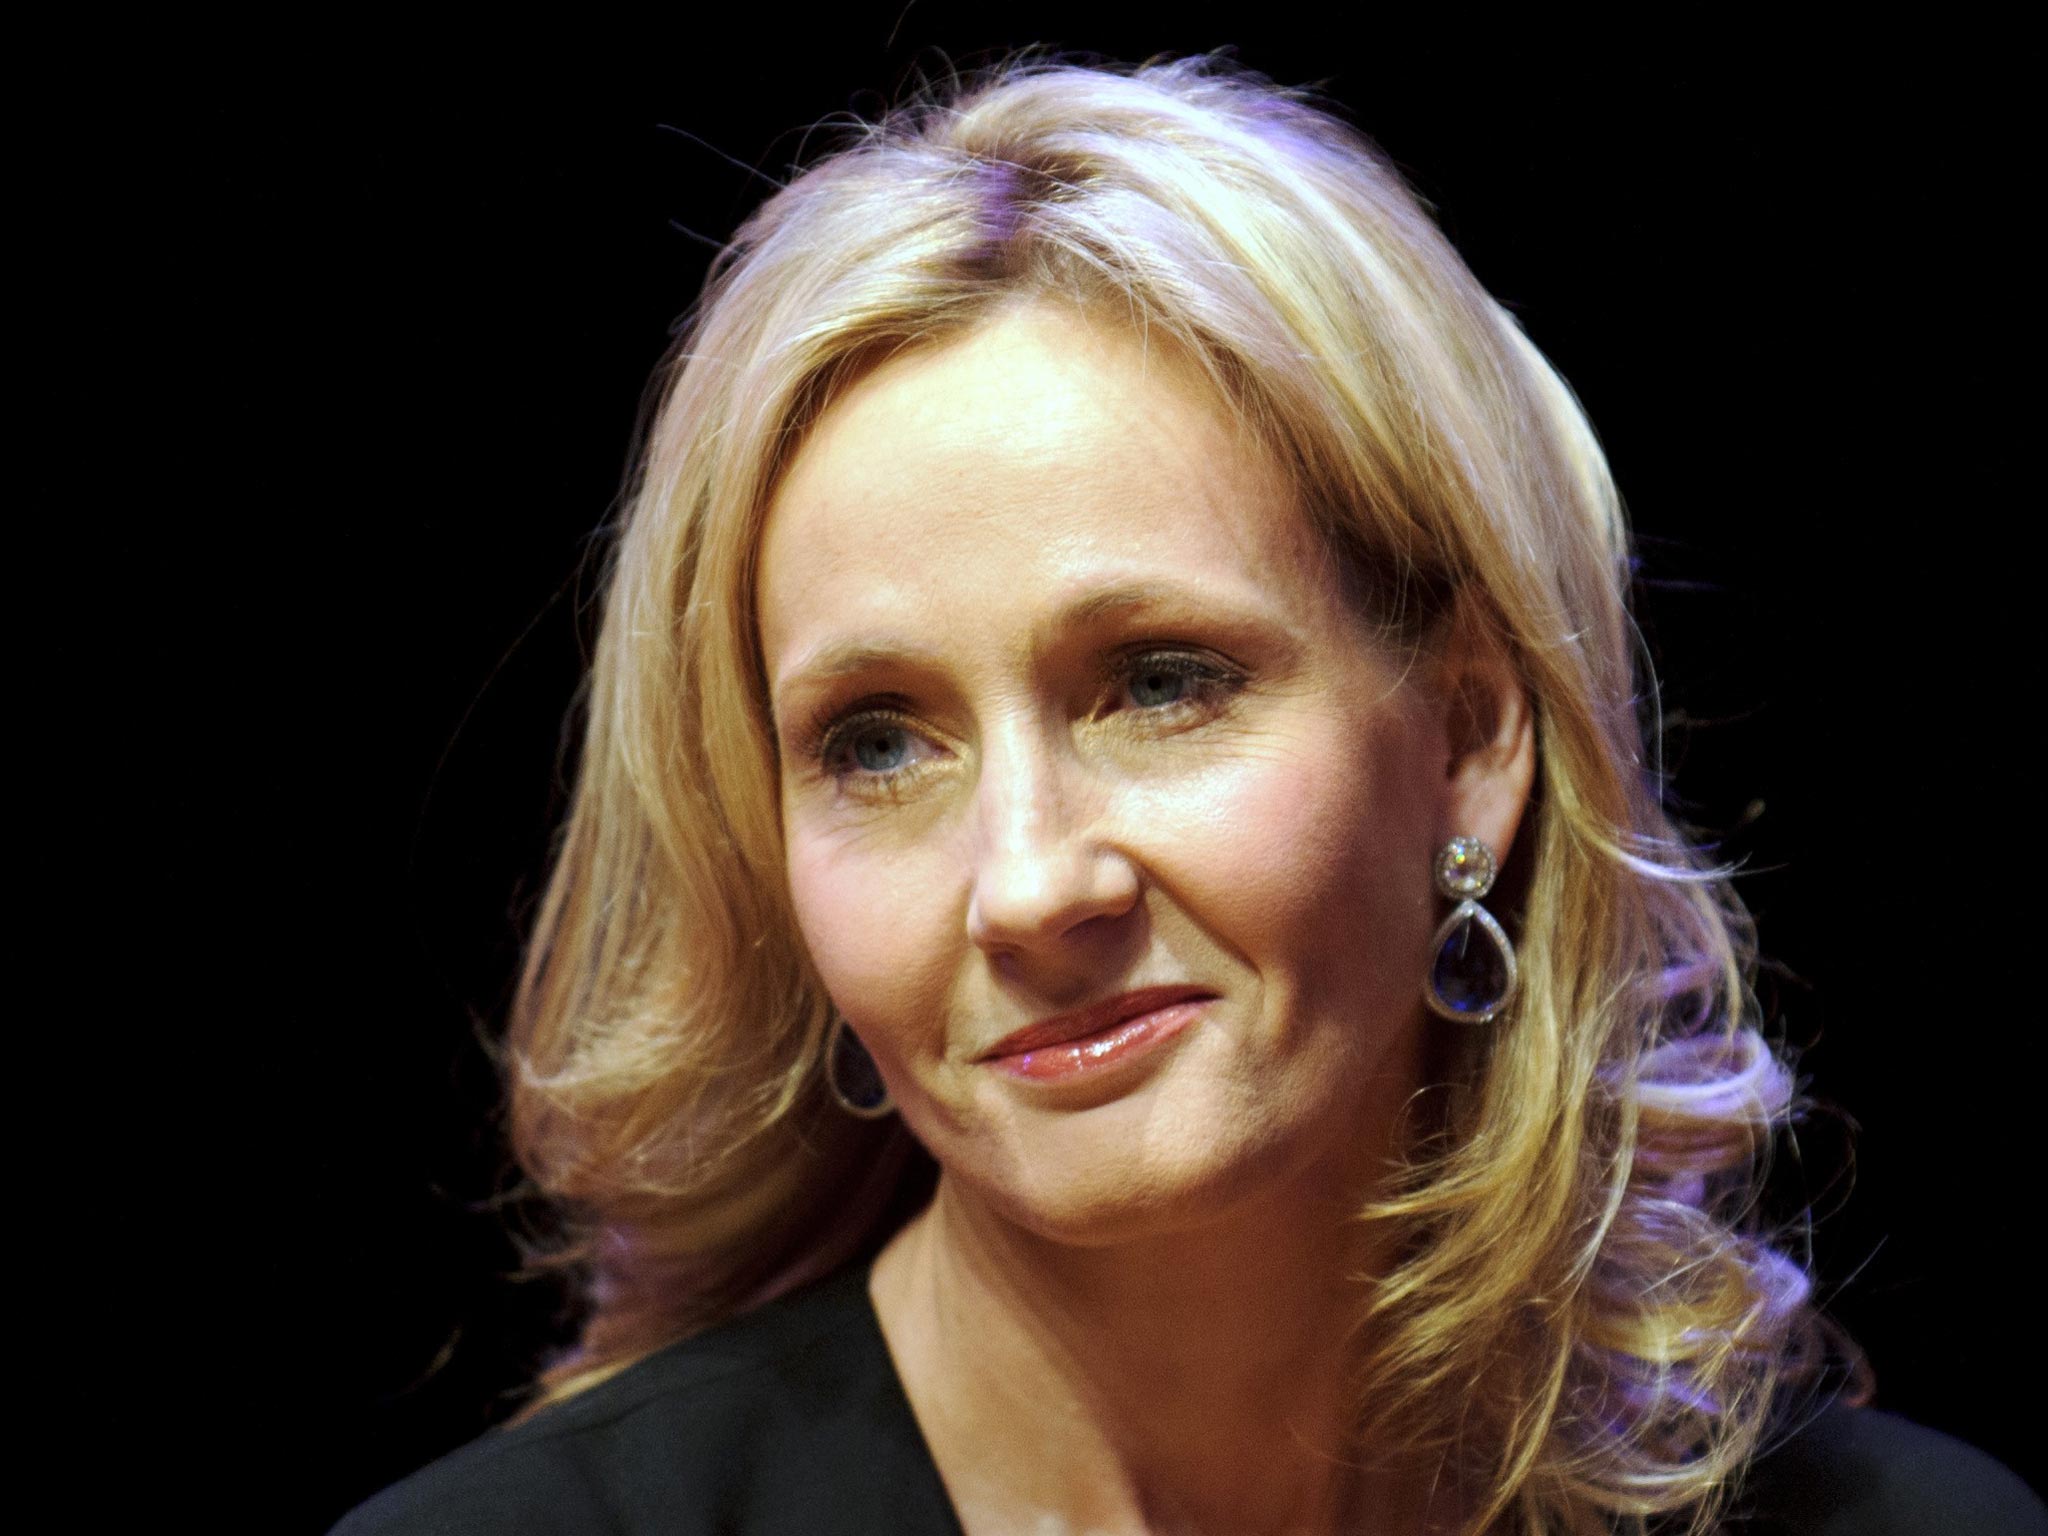 JK Rowling has been seemingly inspired by the petty squabbles of professional football